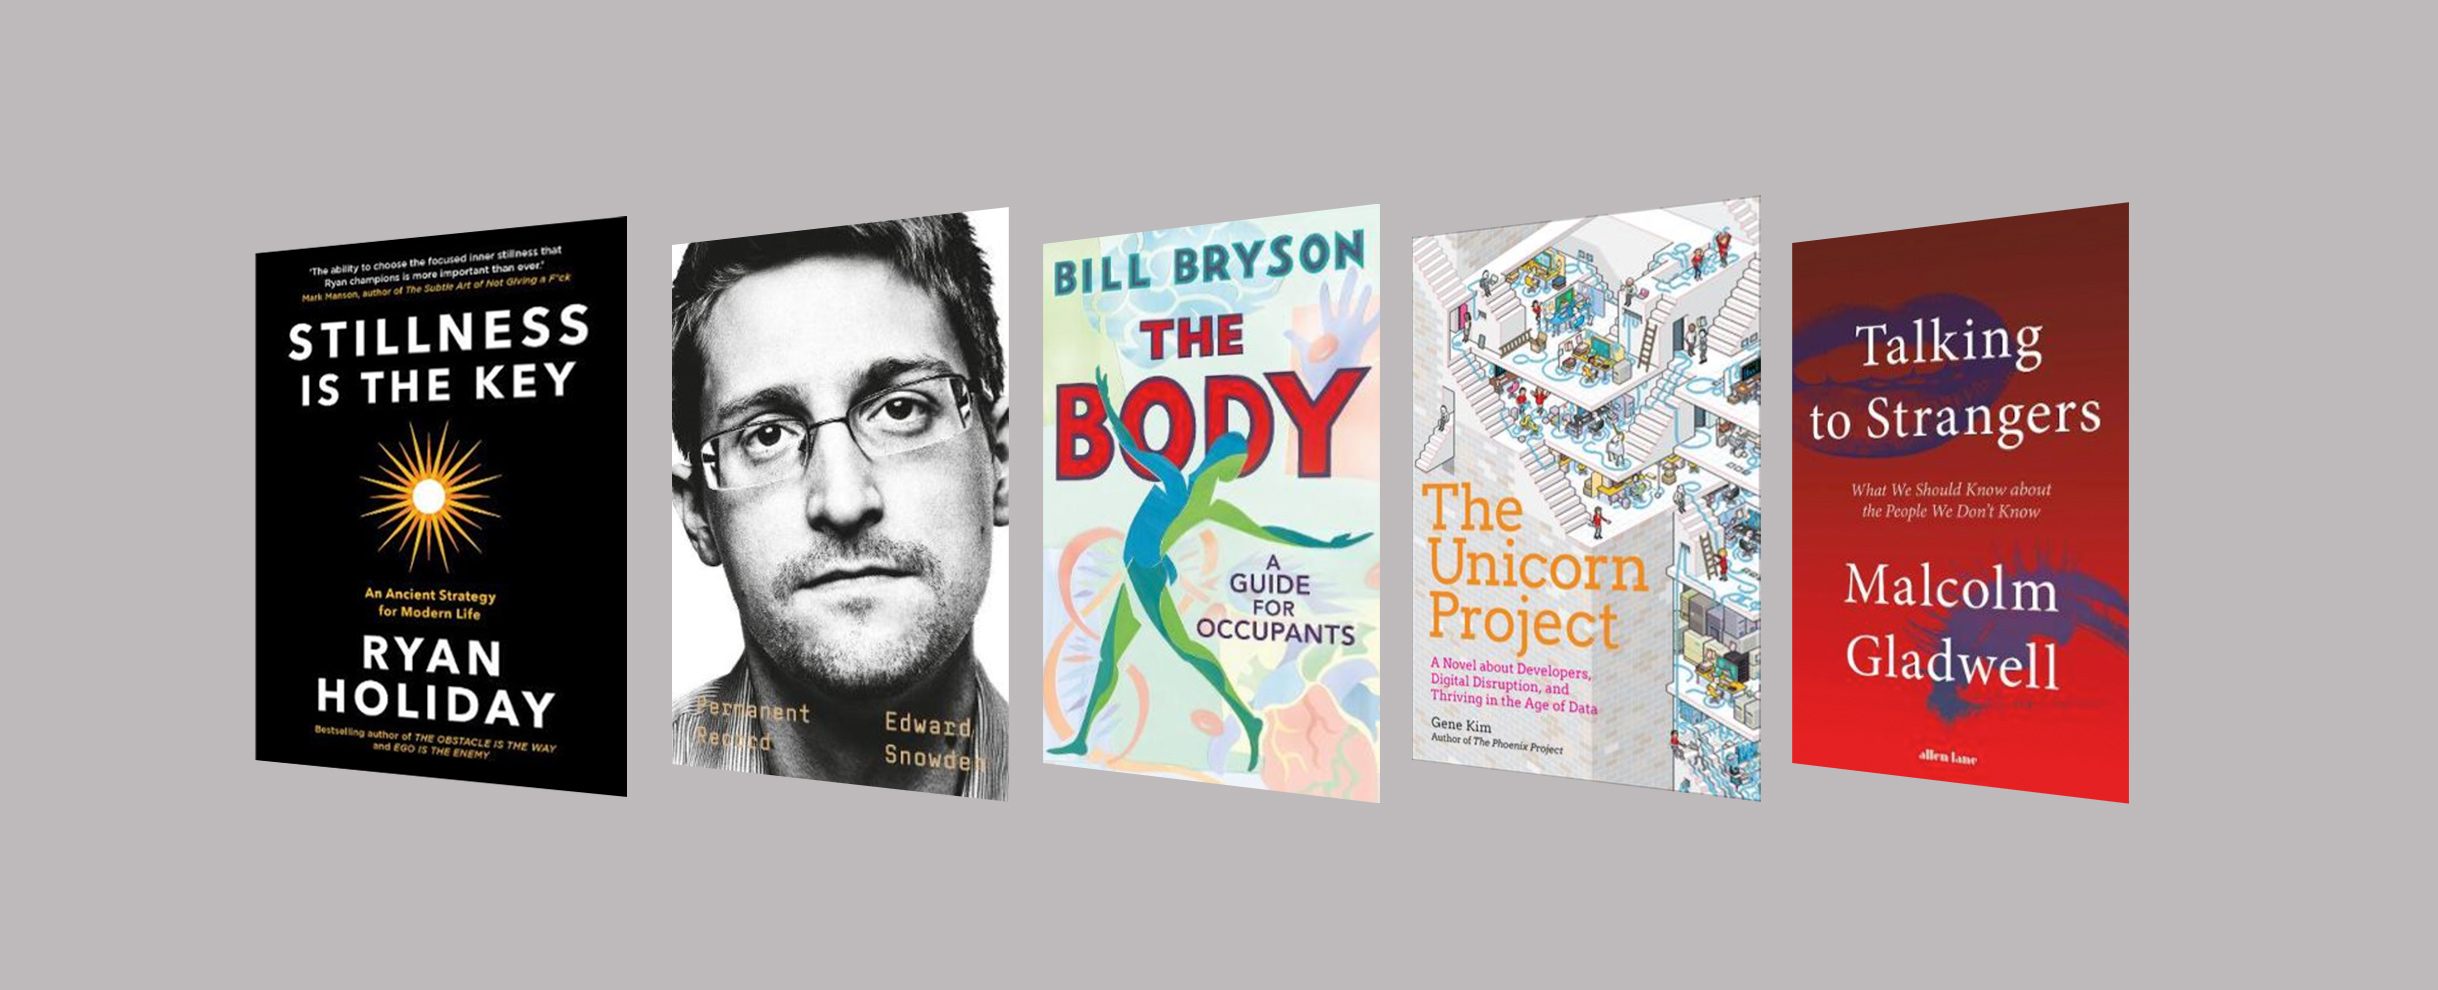 New Smart Thinking Book Gift Ideas